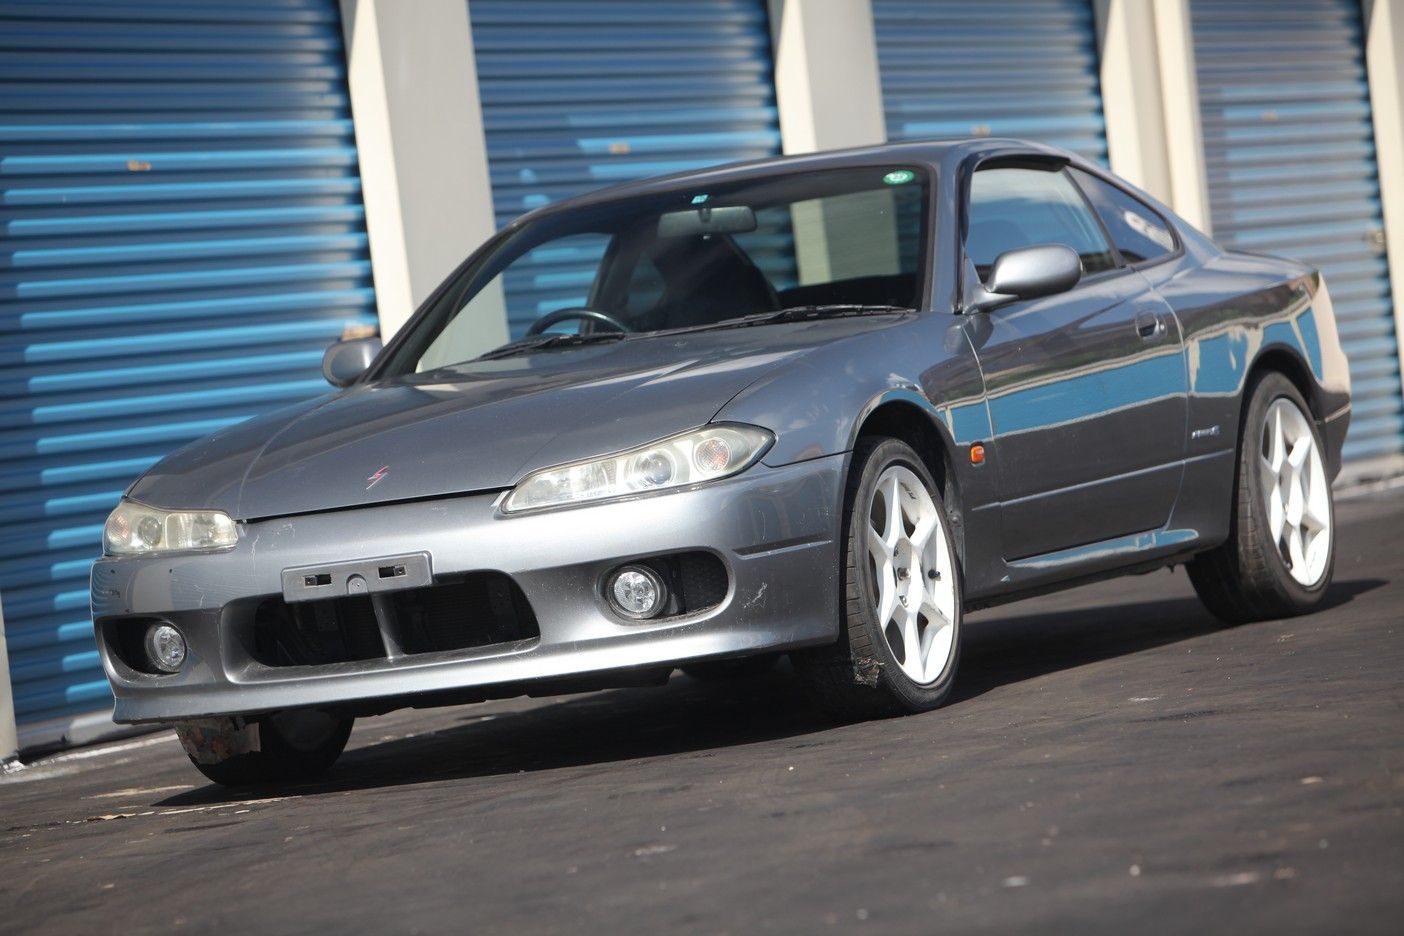 2001 Nissan silvia s15 for sale #1